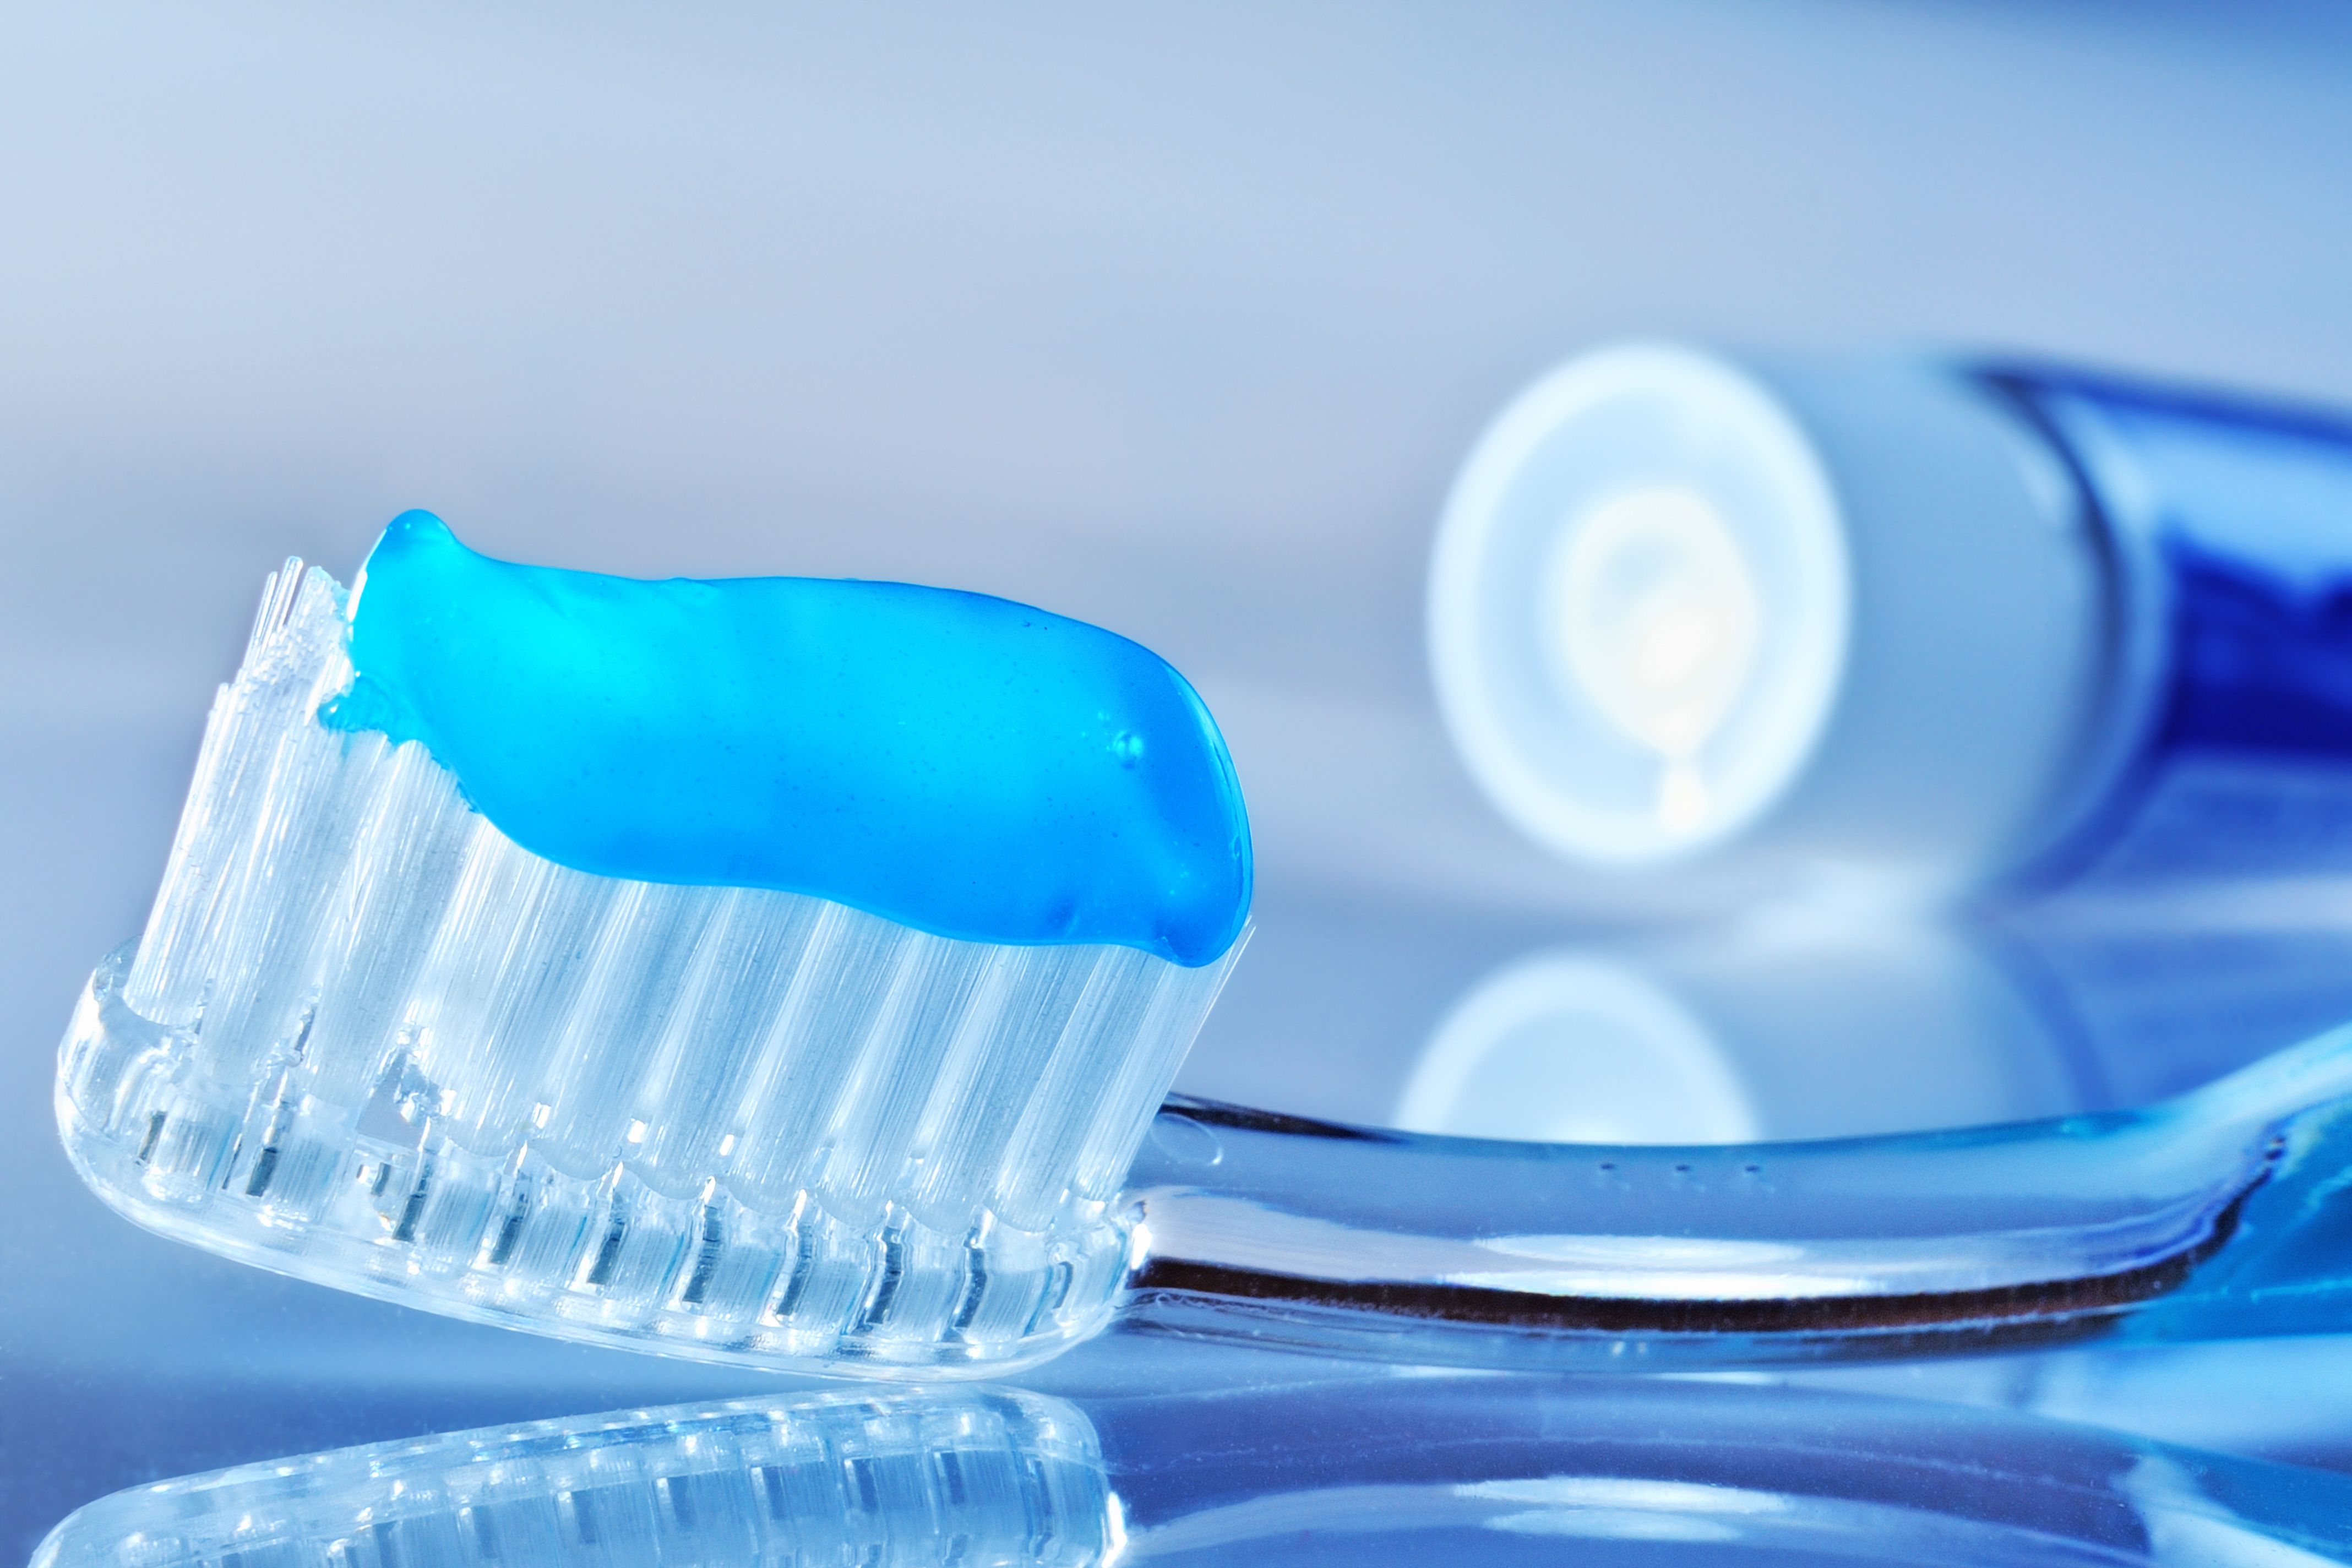 Toothpaste and Toothbrush Wallpaper Background 62568 4272x2848px